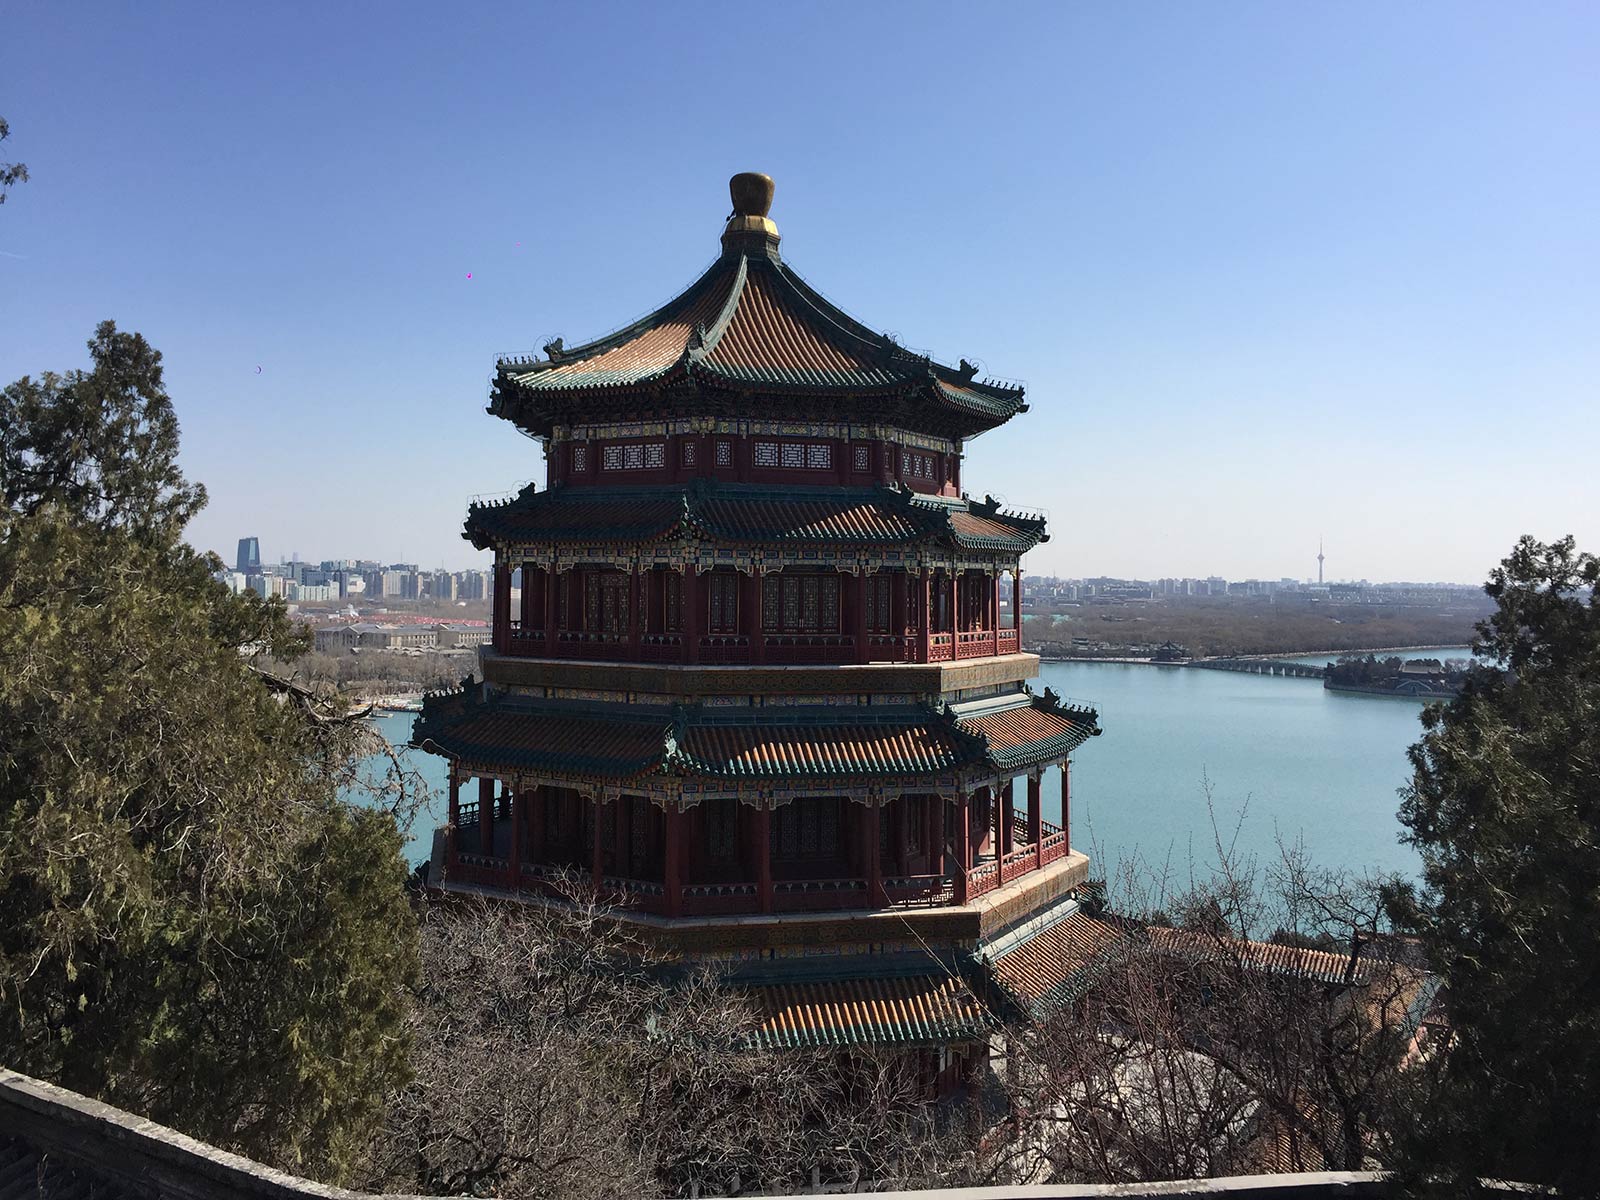 A tower in the Summer Palace in Beijing, China. The Summer Palace